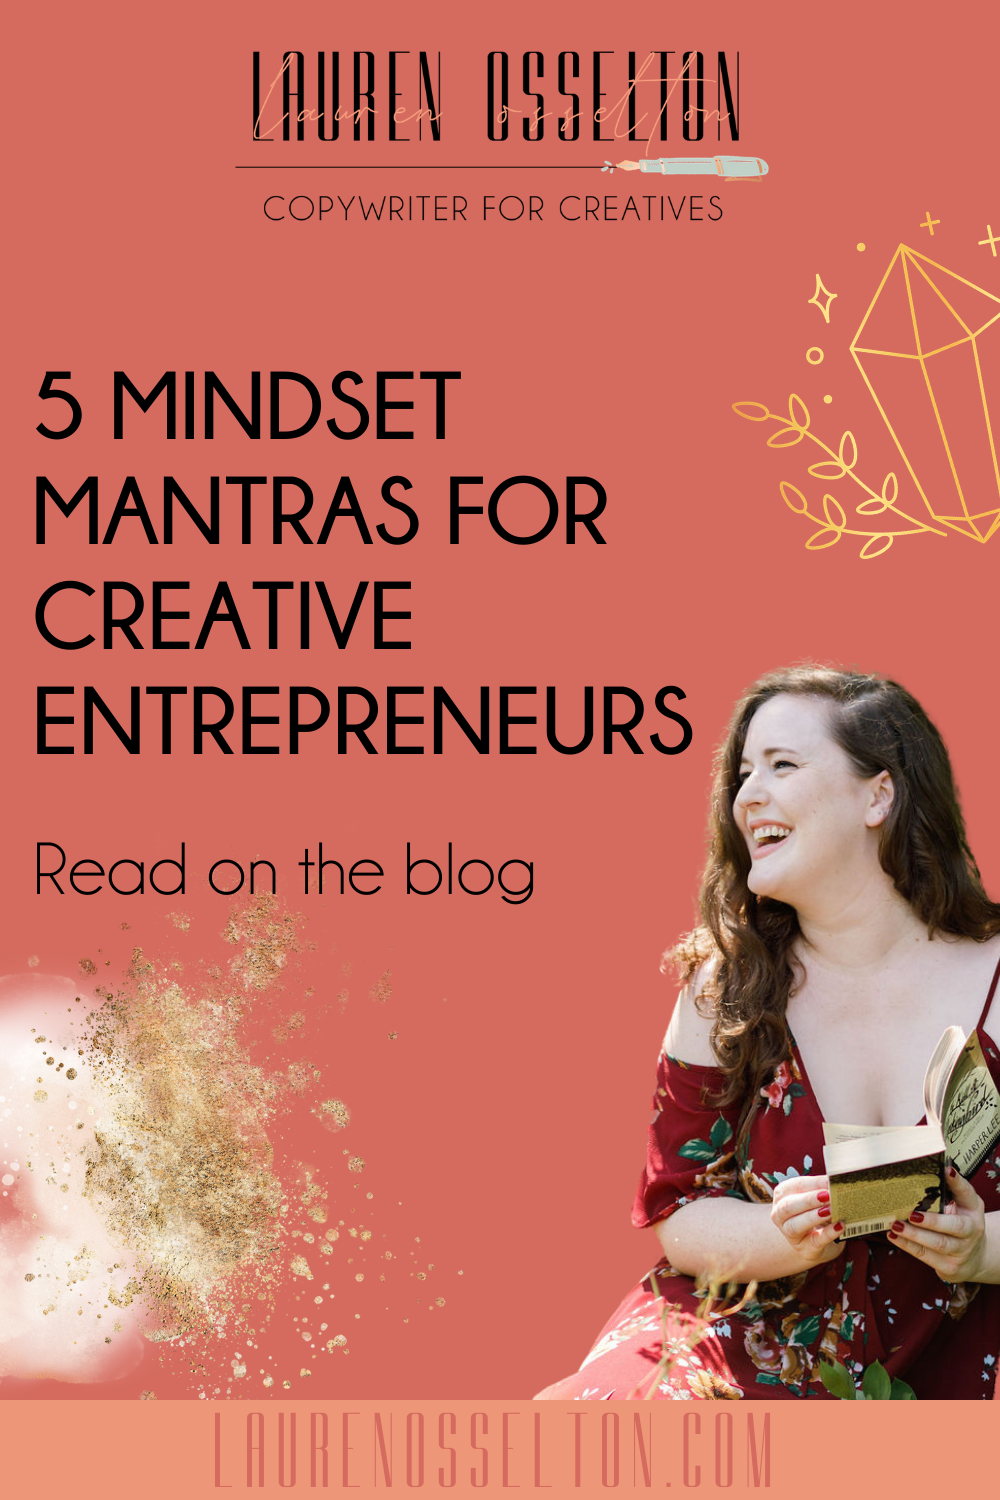 5 Affirmations For a Stronger Mindset in Your Creative Business | Lauren Osselton. As a creative entrepreneur and female entrepreneur, you need to work on your entrepreneur mindset! I gathered my 5 favorite mantras to inspire you to work on your mindset skills! Mantras are my favorite entrepreneur mindset tips, they're really easy to use and will impact your mindset positively! Click to see my 5 mindset mantras for creative entrepreneurs now!